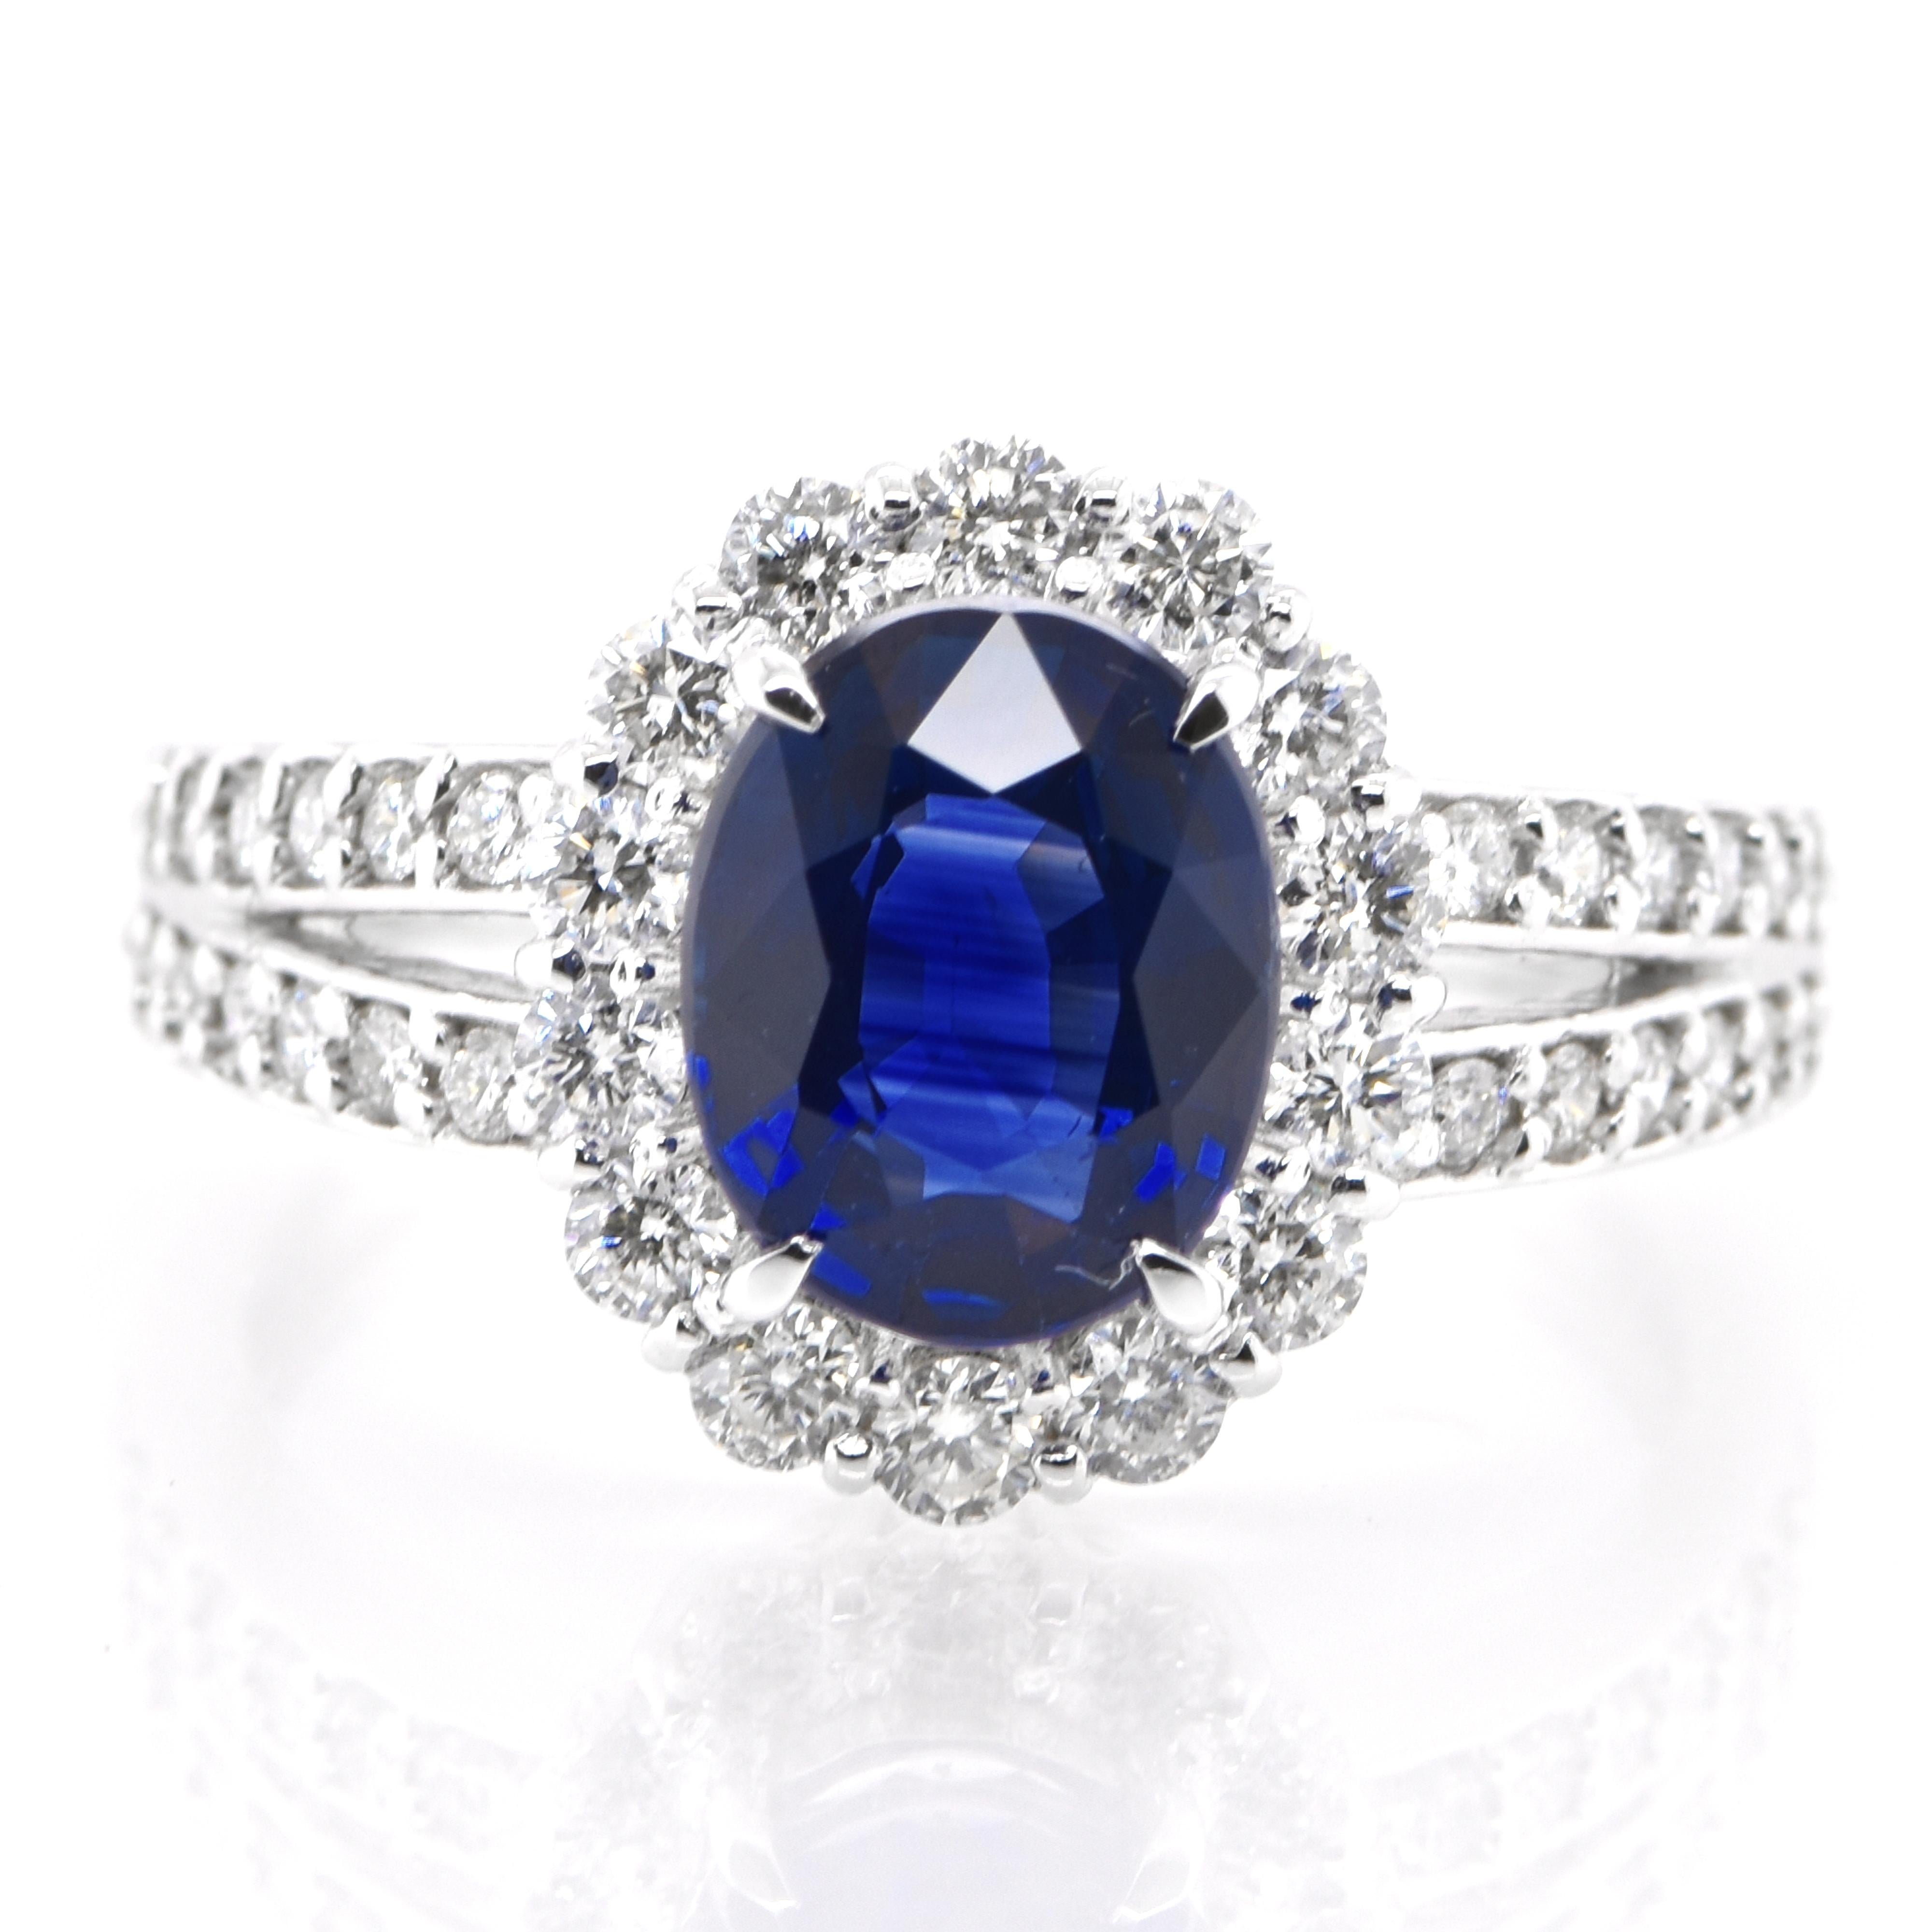 A beautiful ring featuring a GIA Certified 2.02 Carat Natural Ceylon Sapphire and 0.65 Carats Diamond Accents set in Platinum. Sapphires have extraordinary durability - they excel in hardness as well as toughness and durability making them very